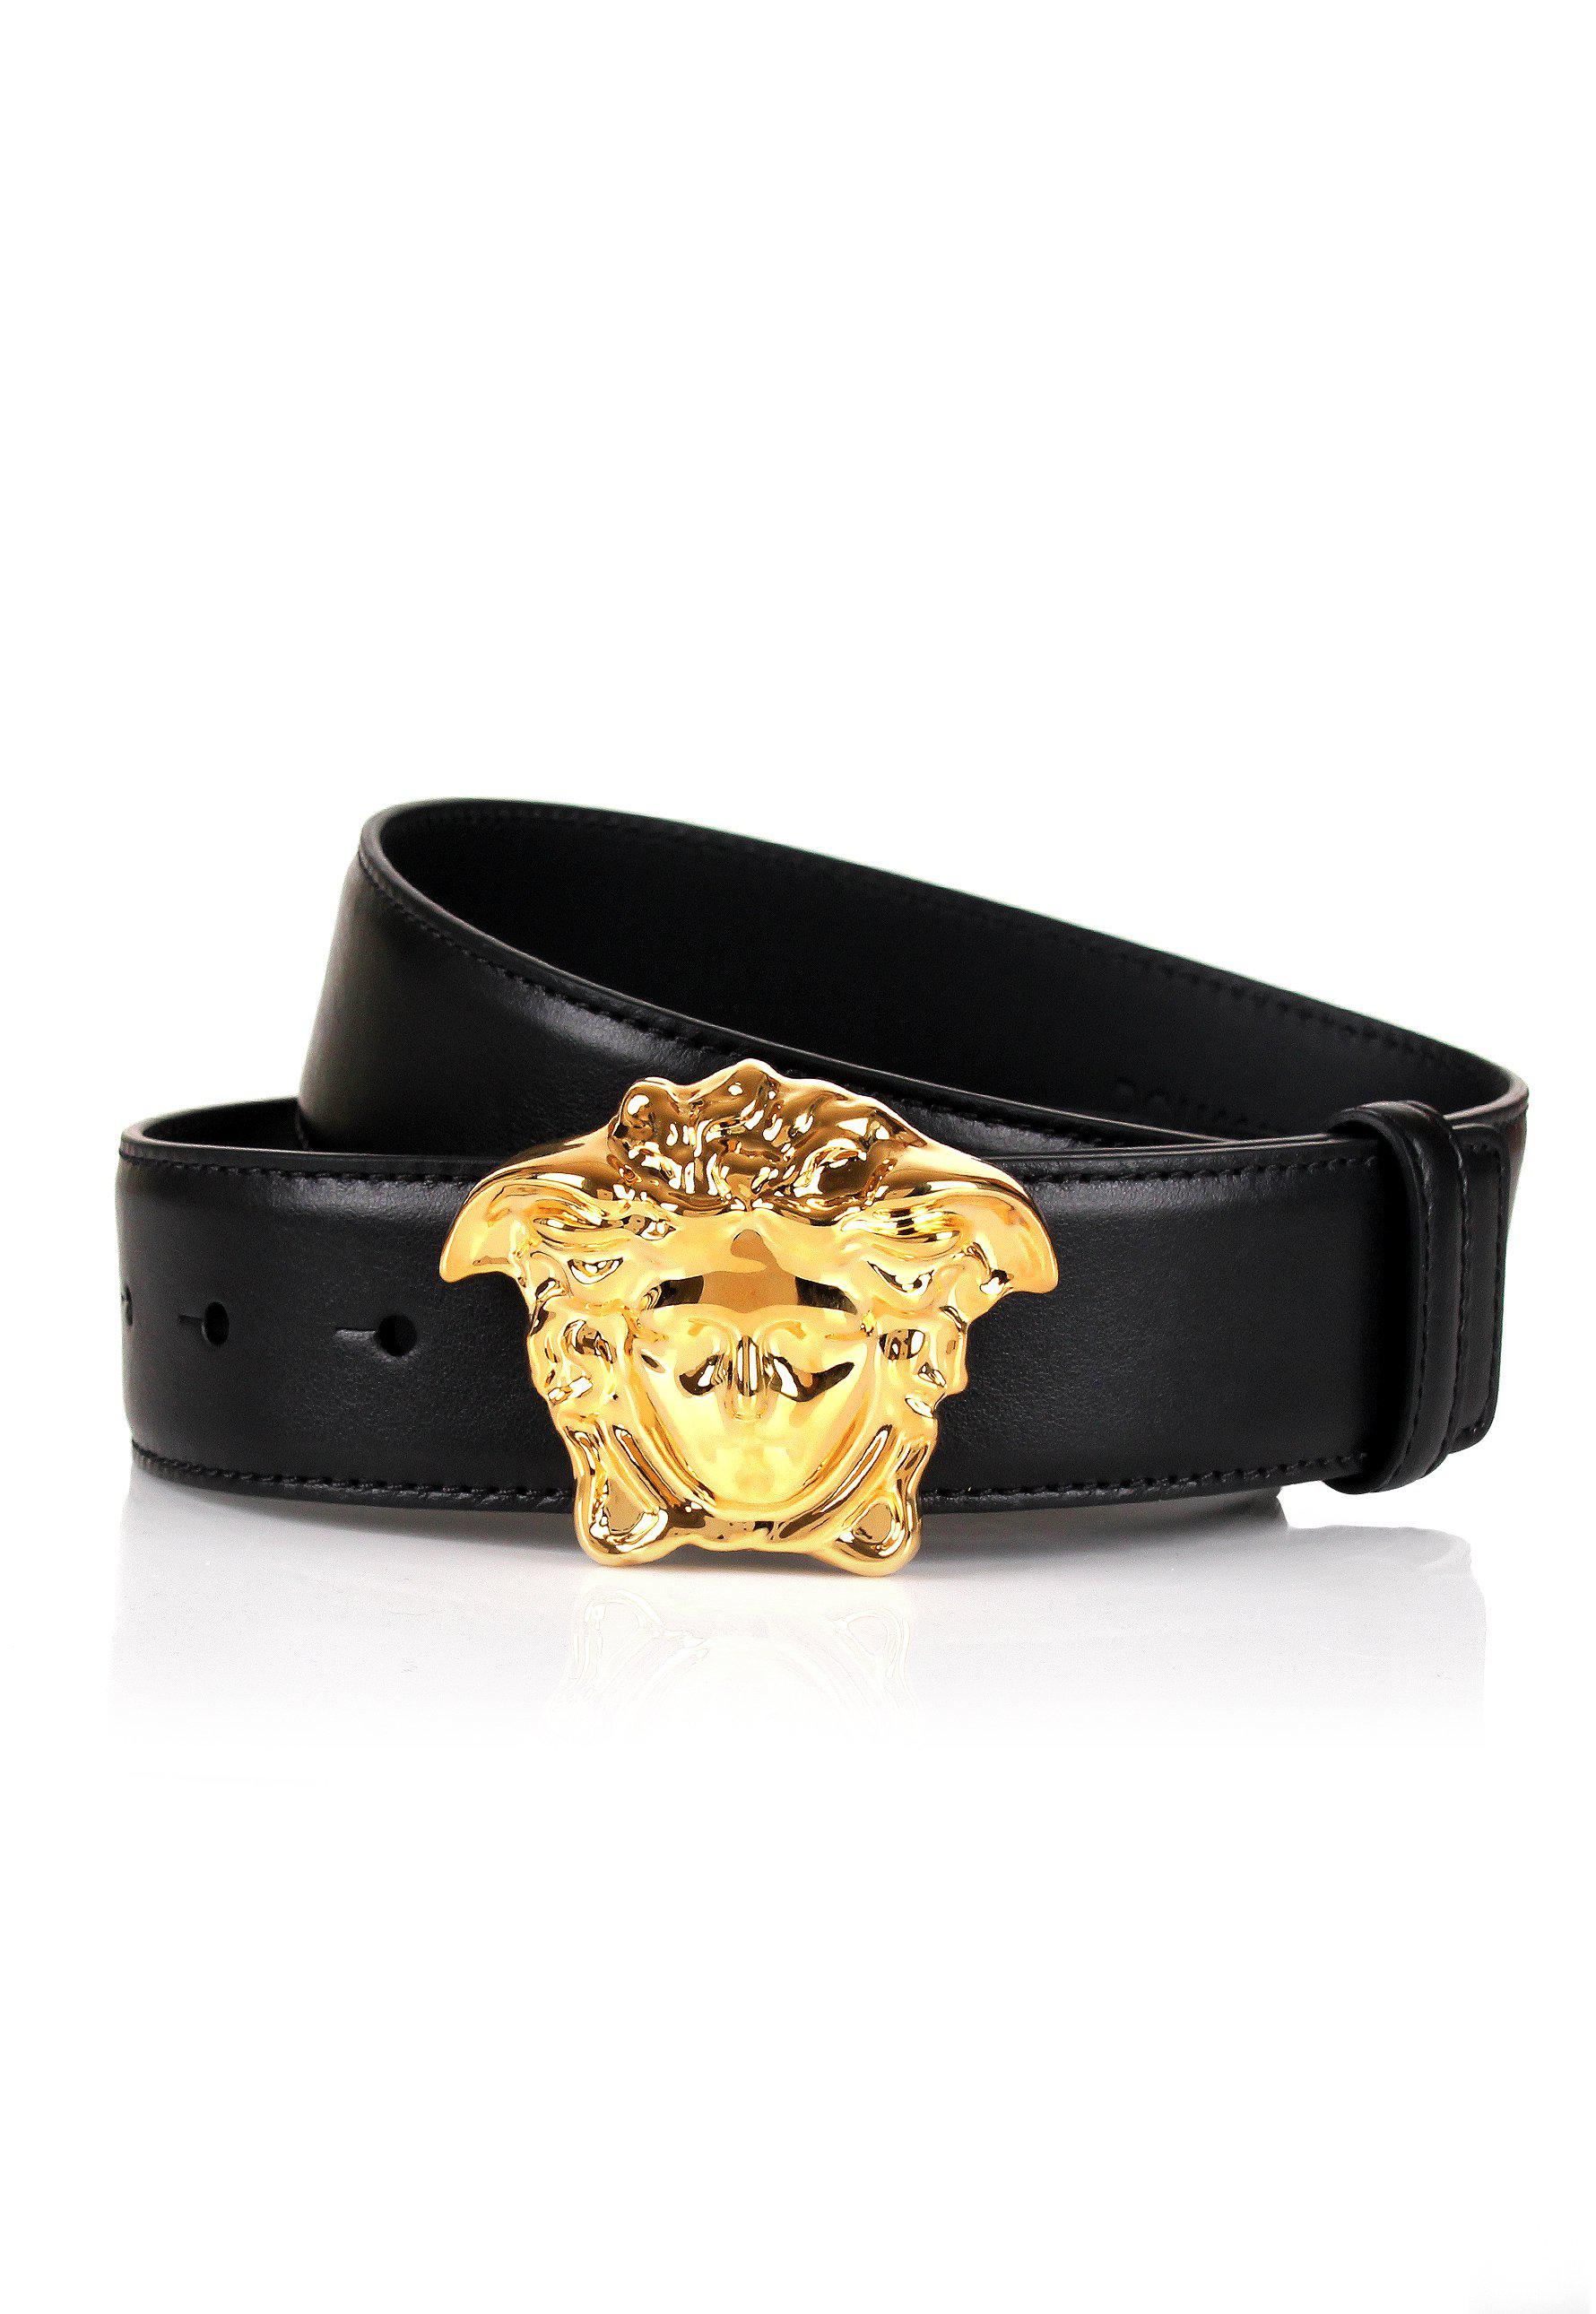 Lyst - Versace Palazzo Medusa Head Belt - Smooth Leather Black/gold in ...